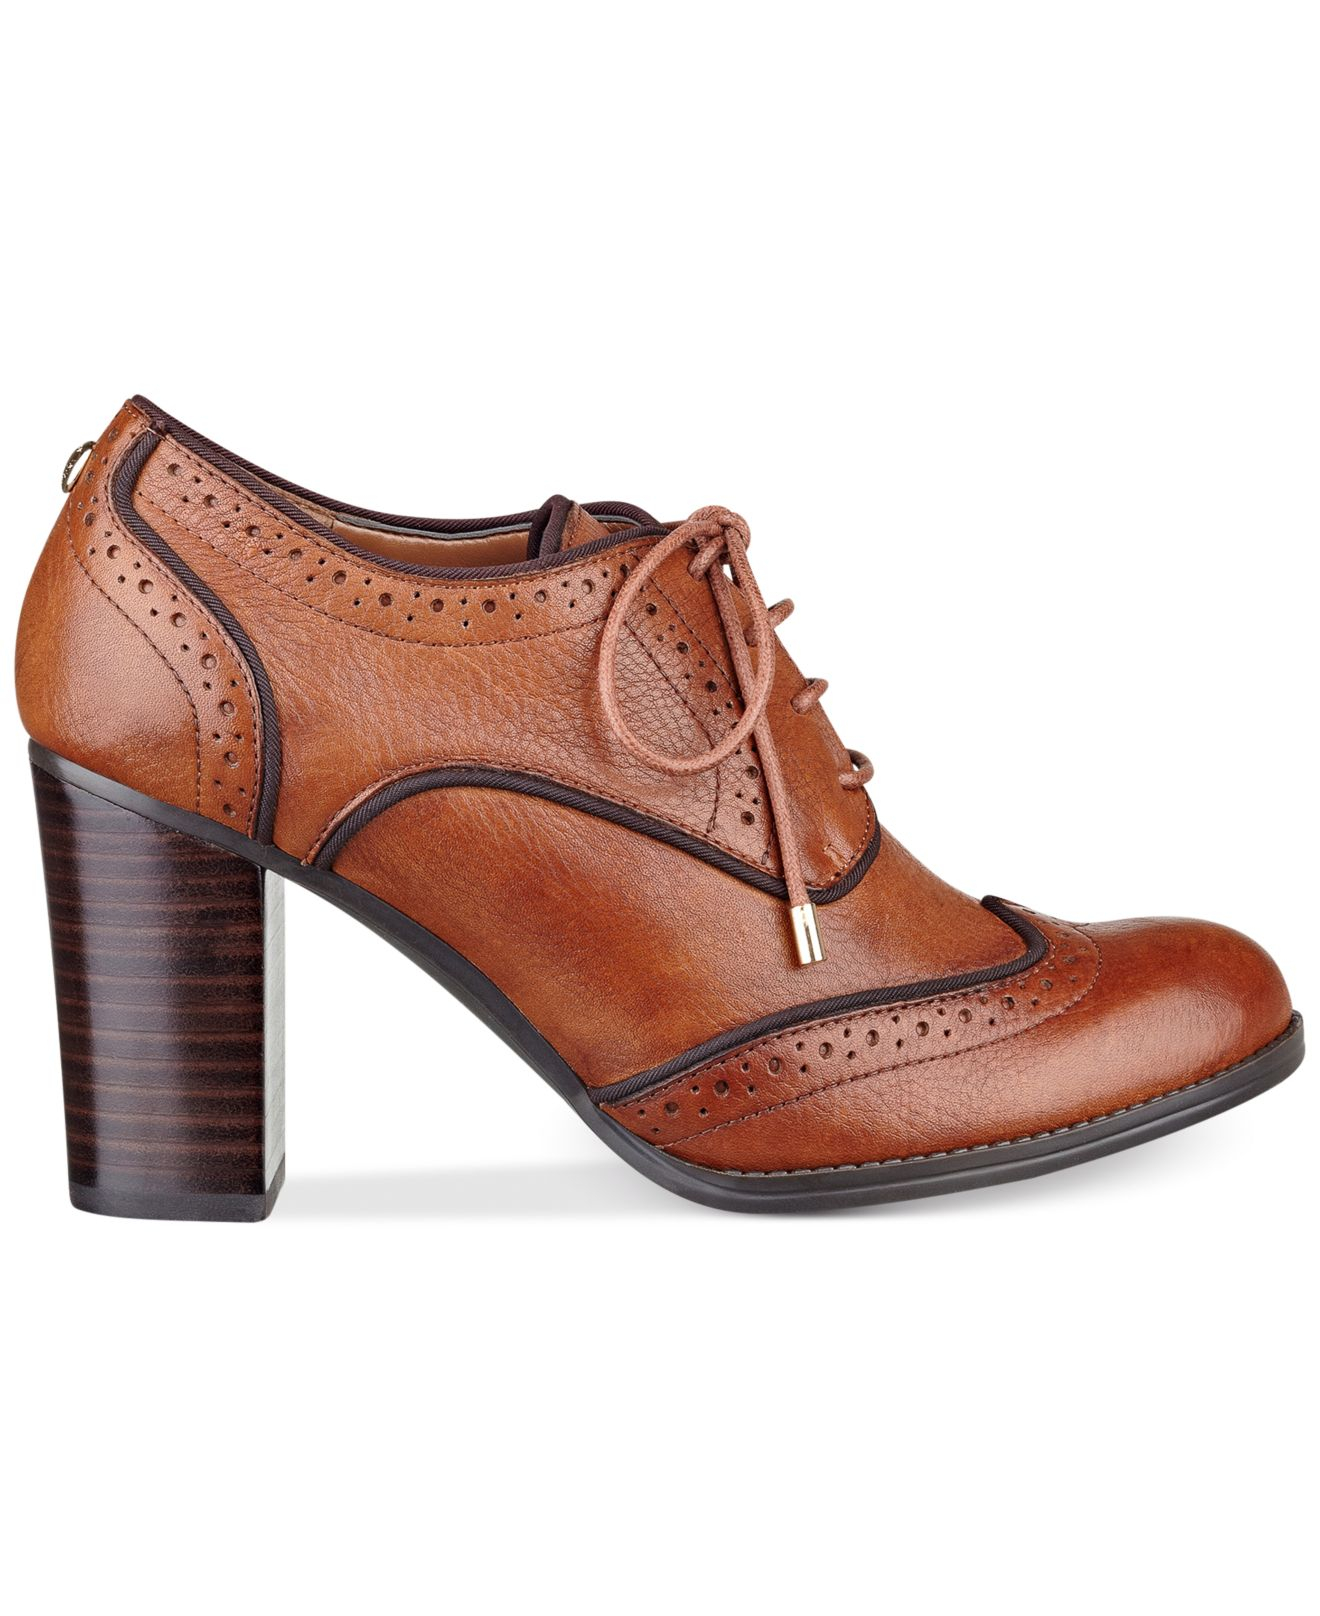 Tommy Hilfiger Women'S Fabiole Oxford Shooties in Light Chestnut Leather  (Brown) | Lyst